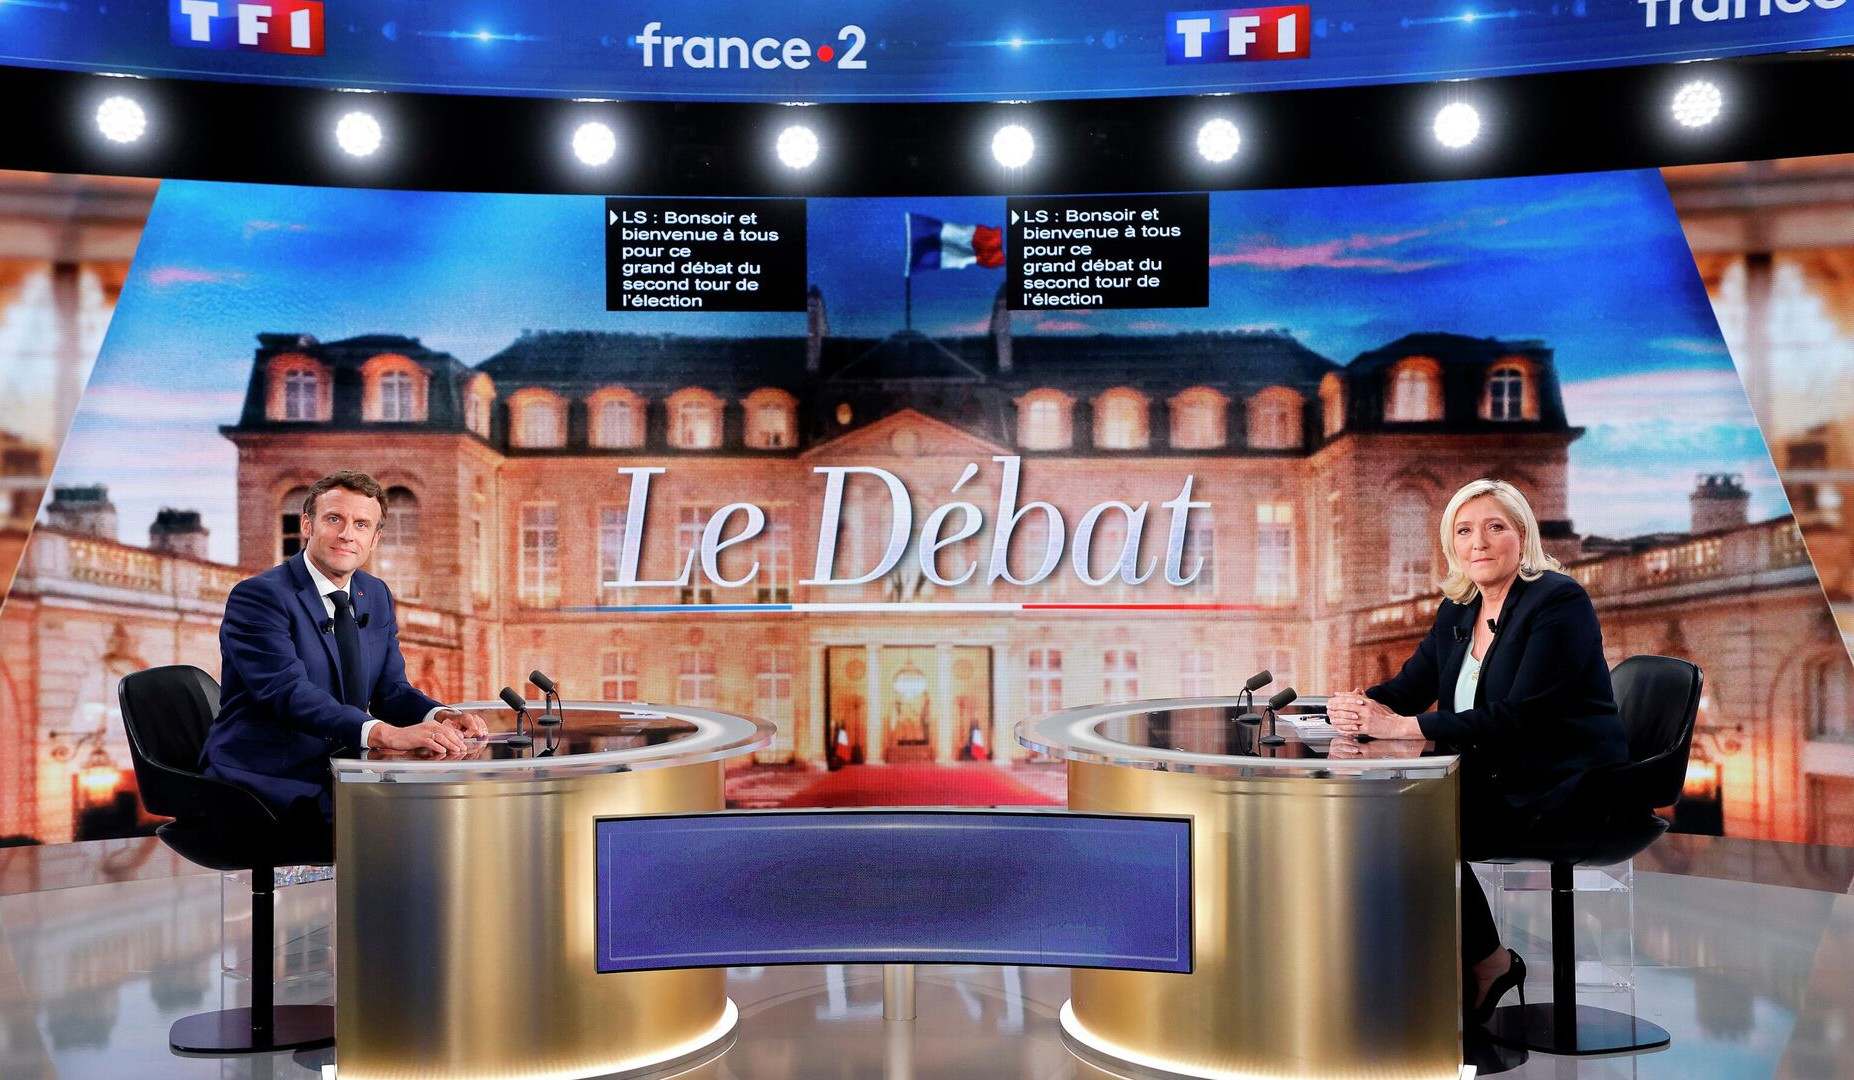 Macron and Le Pen television debate lasted for more than 3 hours